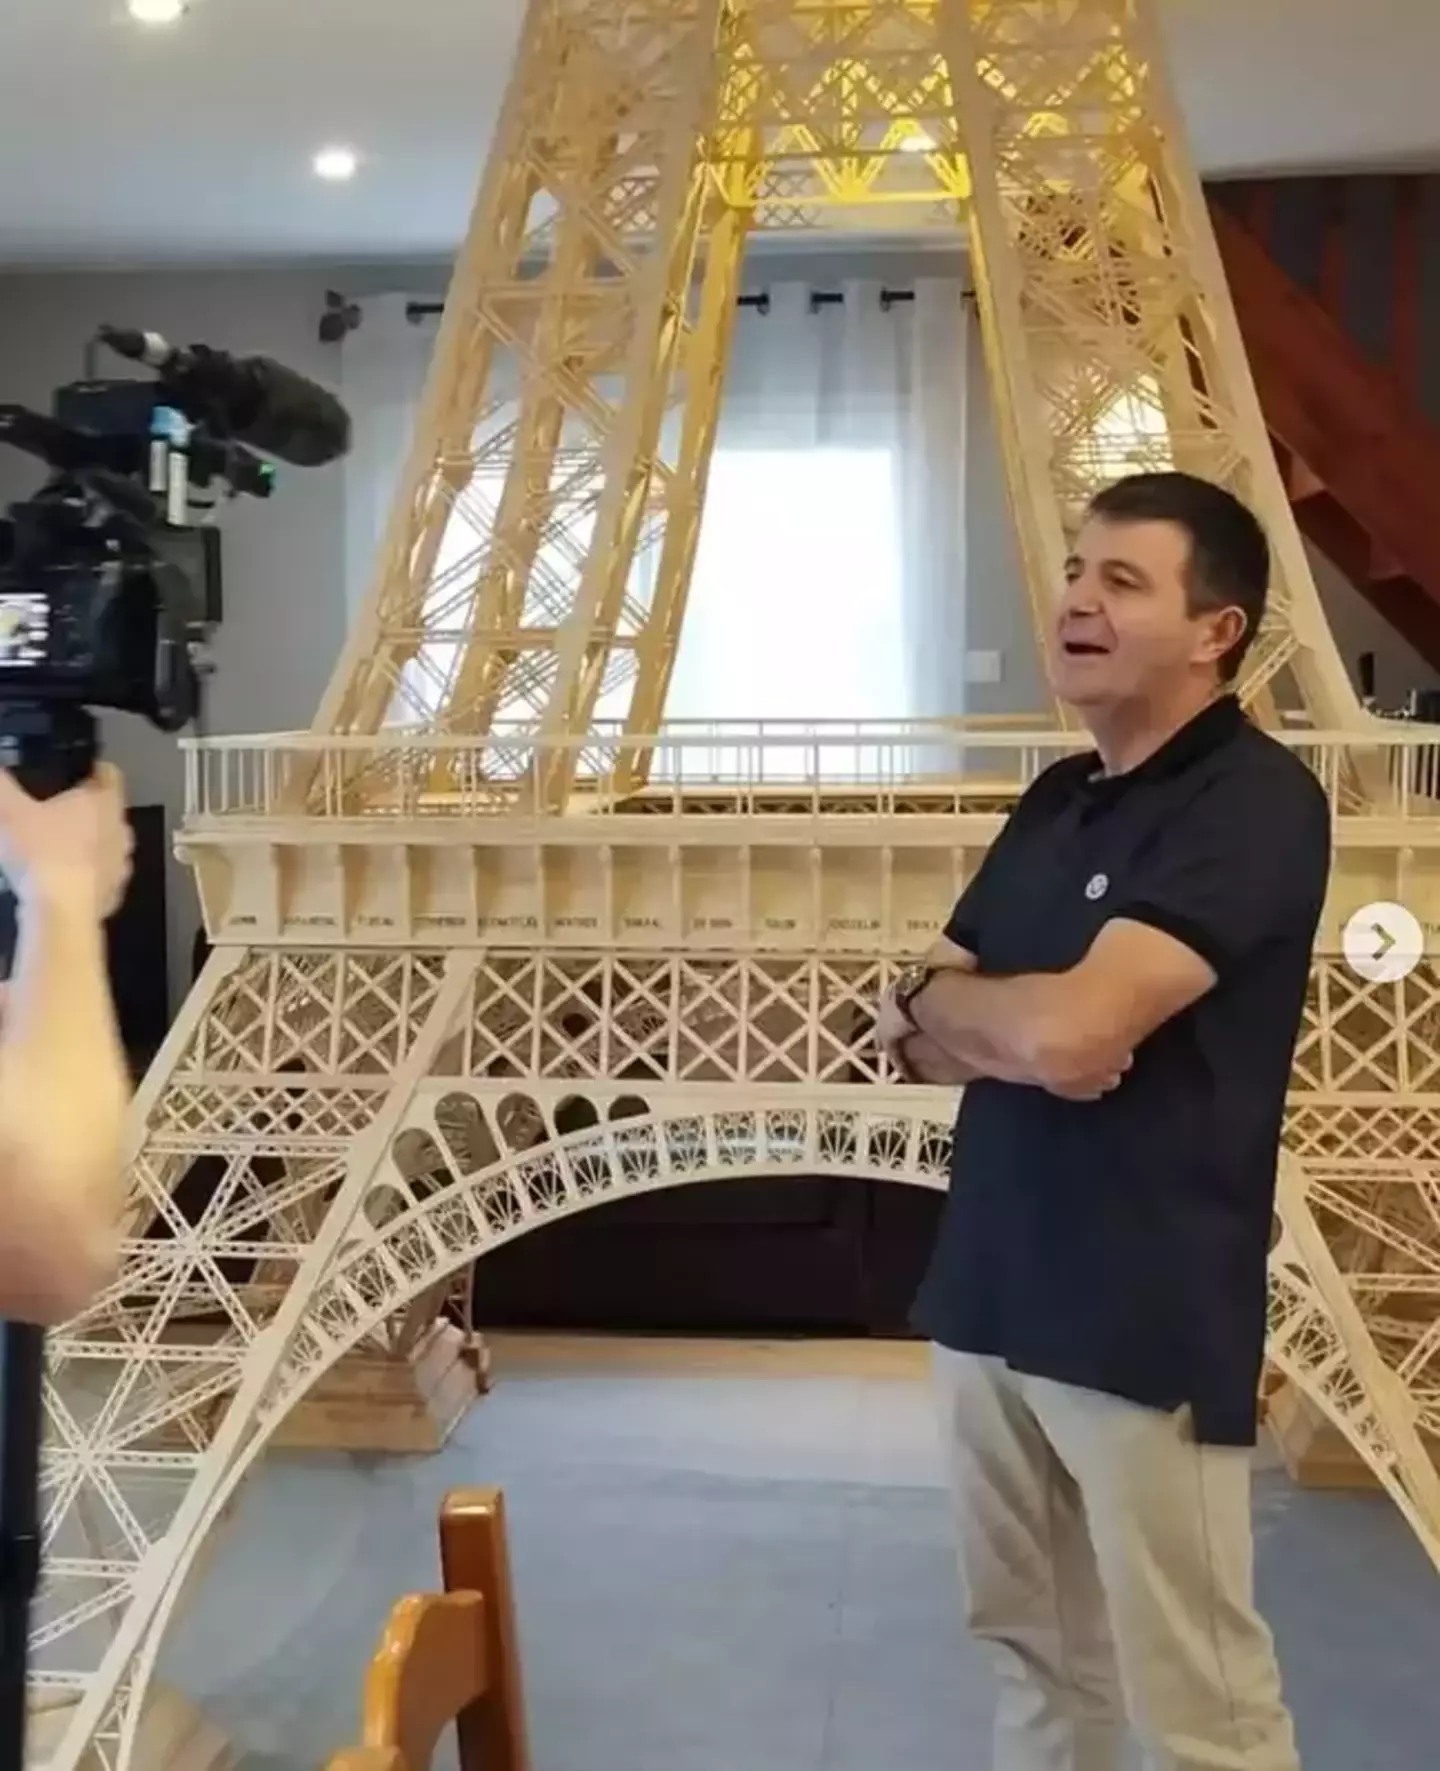 47-year-old Richard Plaud showed his patriotism to his country with his own impressive entry of the Eiffel Tower.